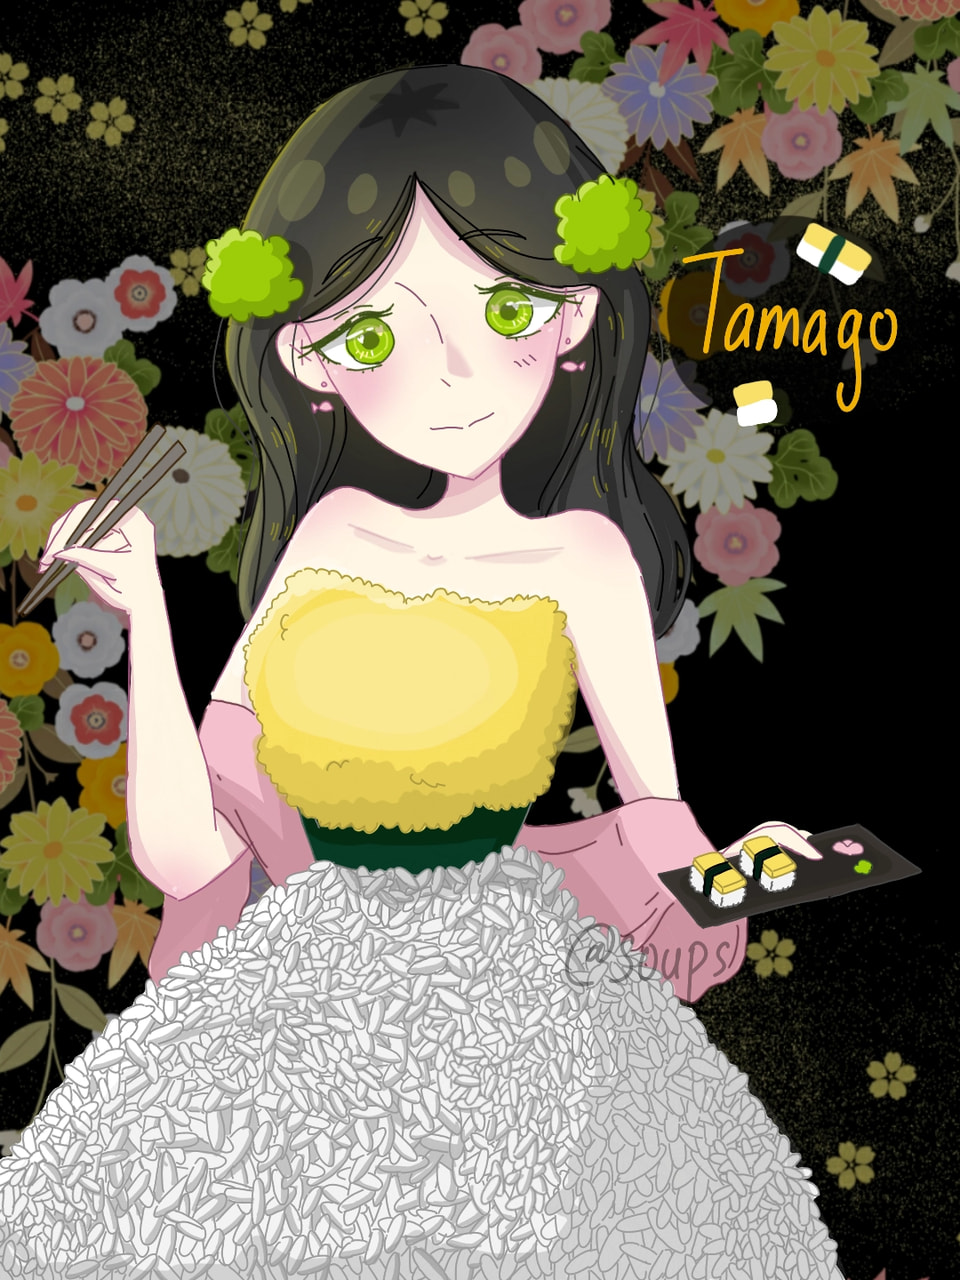 tamago is my fav sushi! the green is wasabi and the pink is ginger ヽ(´∀｀ヽ) #foodchallenge #fridayswithsketch #myart #drawing